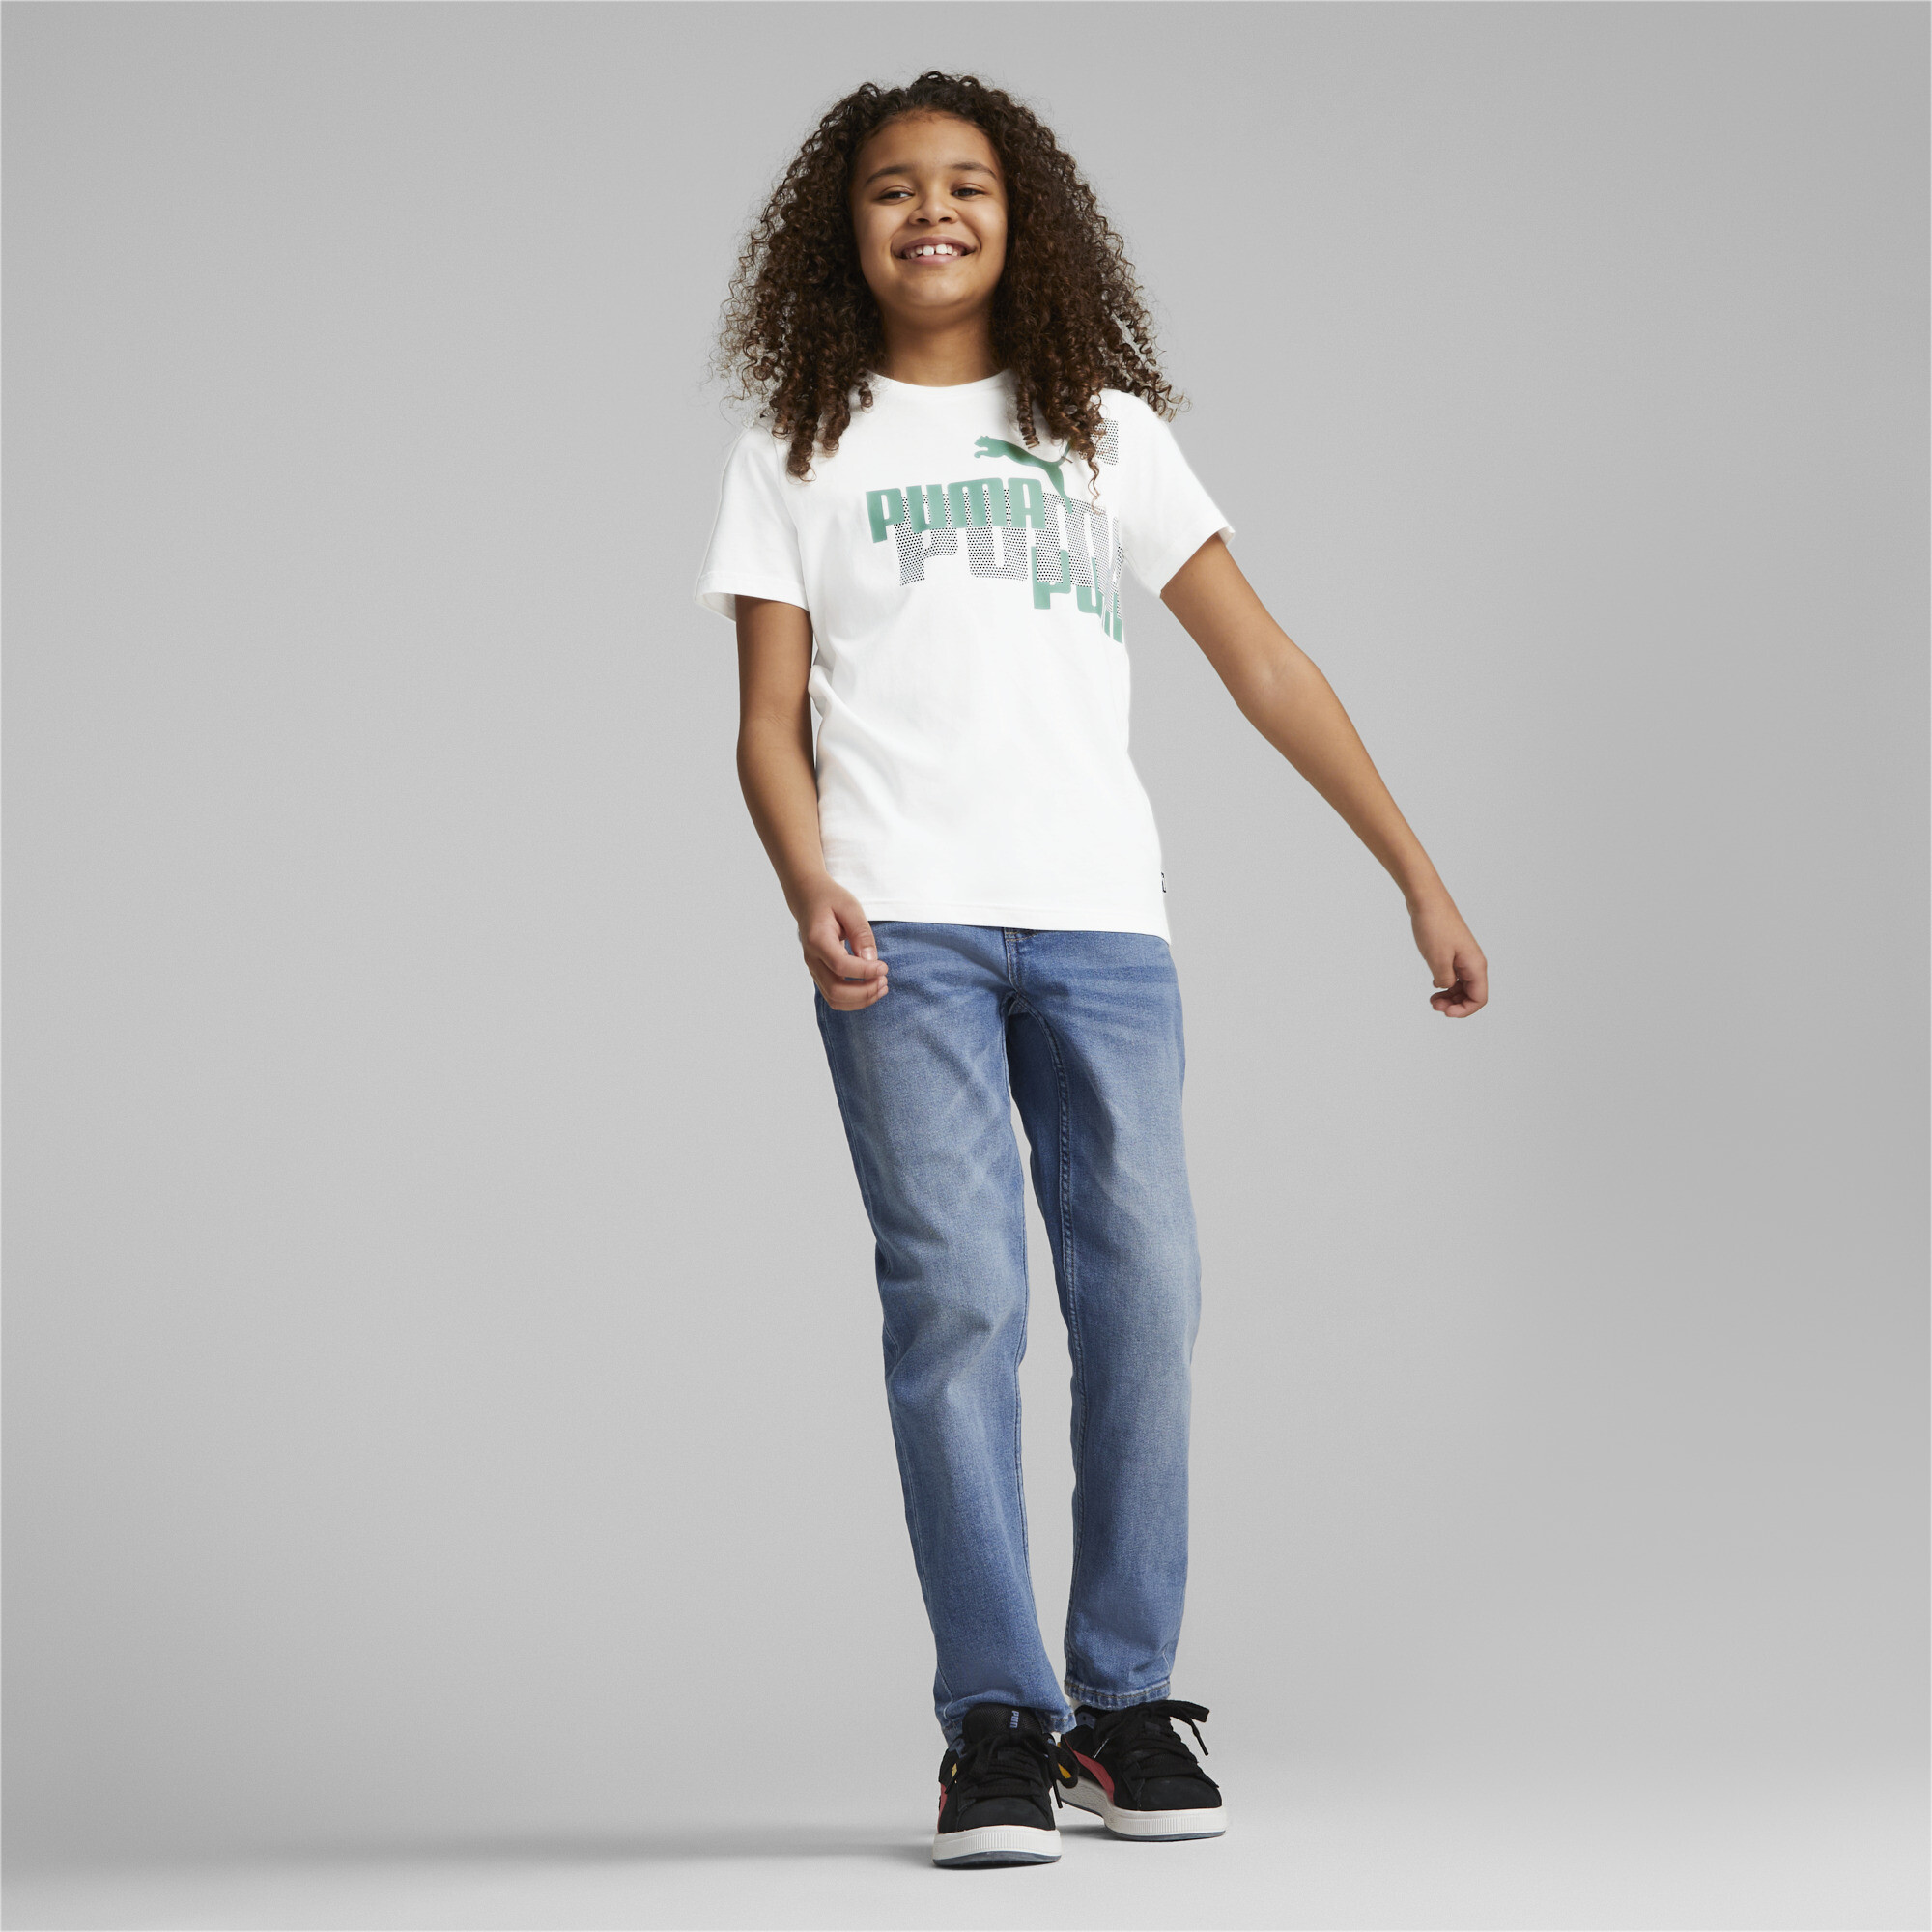 PUMA ESS+ LOGO POWER T-Shirt In White, Size 5-6 Youth